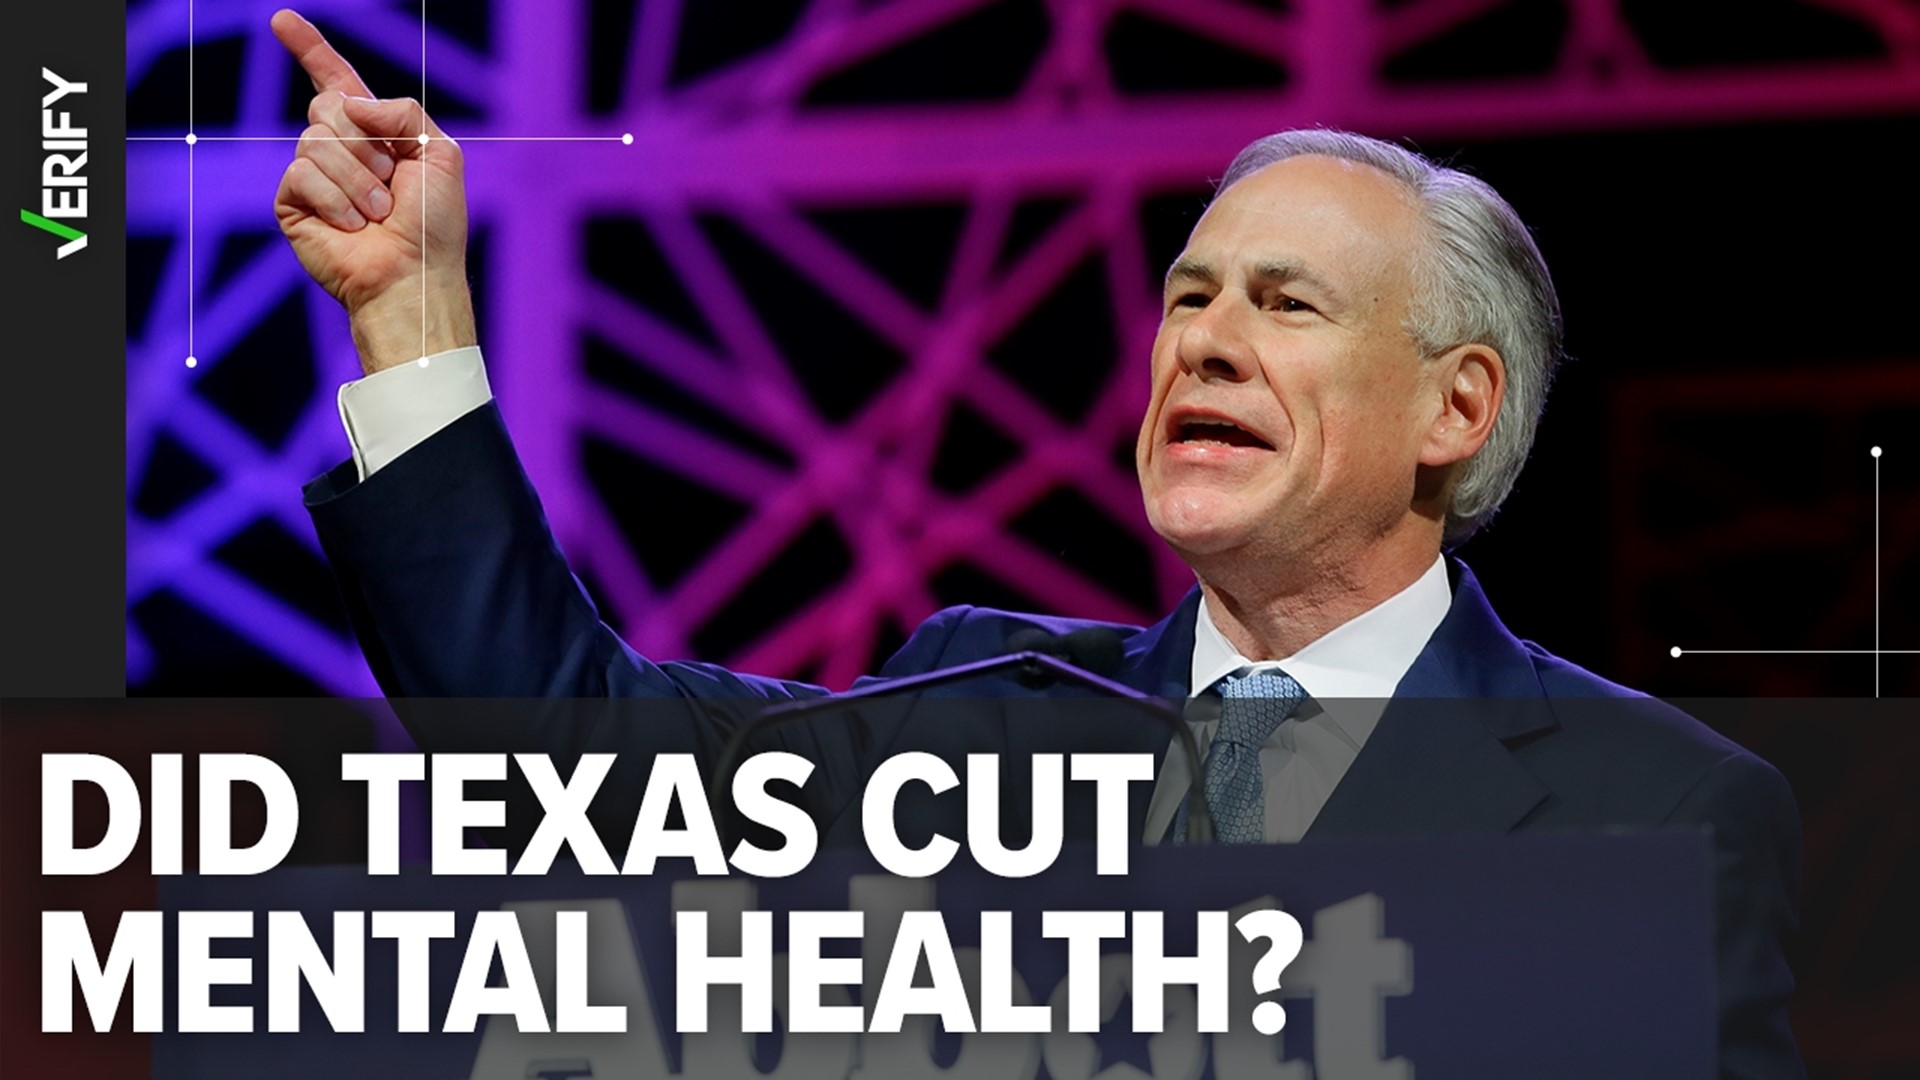 Greg Abbott once moved $200 million from the Department of Health and Human Services to the National Guard, but it's unclear whether any programs were affected.